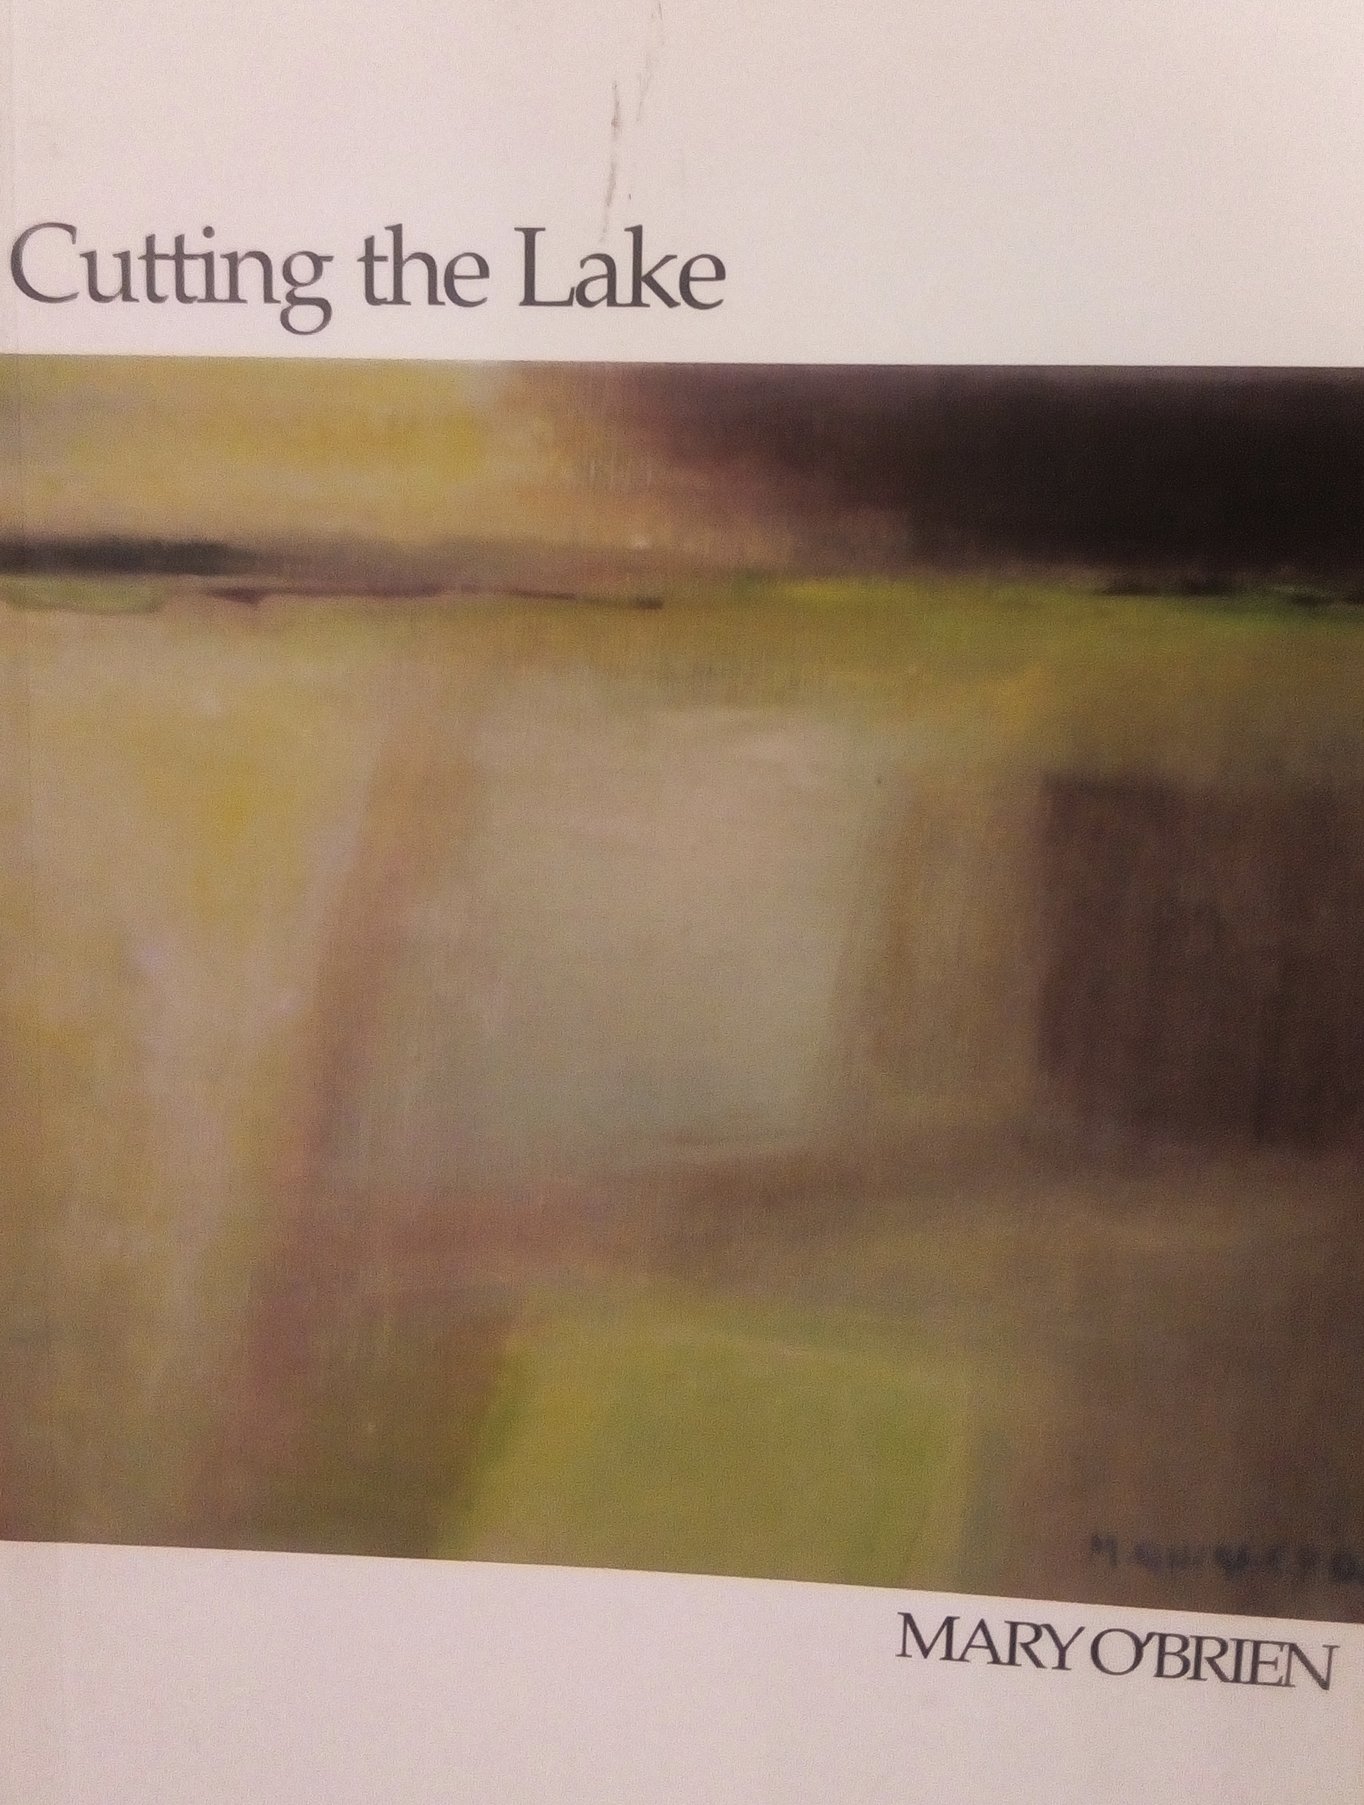 Cutting the Lake by Mary O'Brien